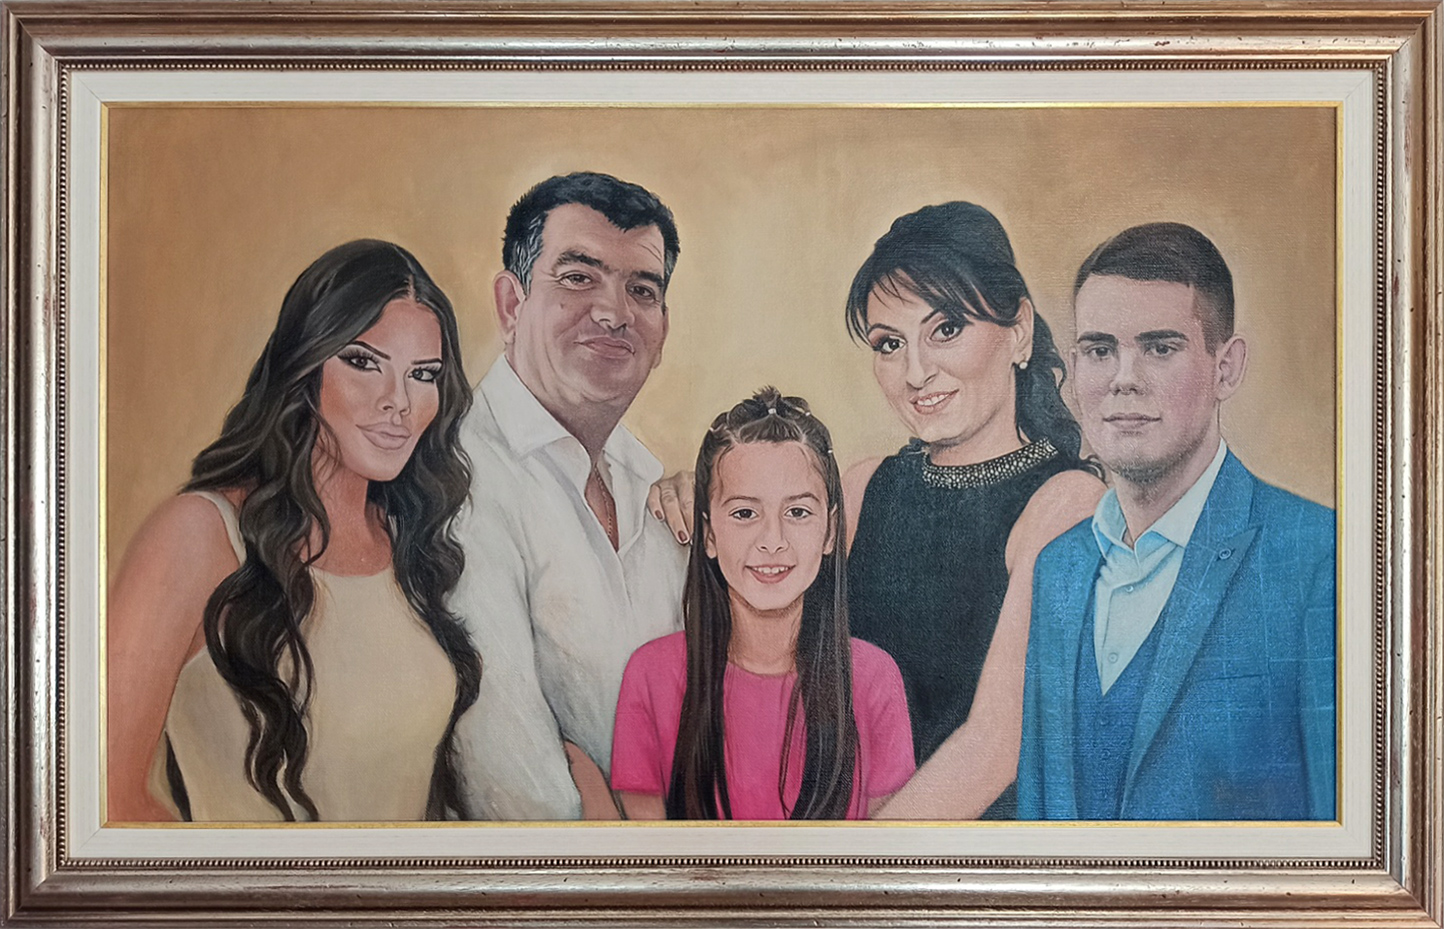 Family Portrait - Commissioned Oil Painting on Canvas 50x90cm - Original Artwork by artist Milica MARUSIC Art